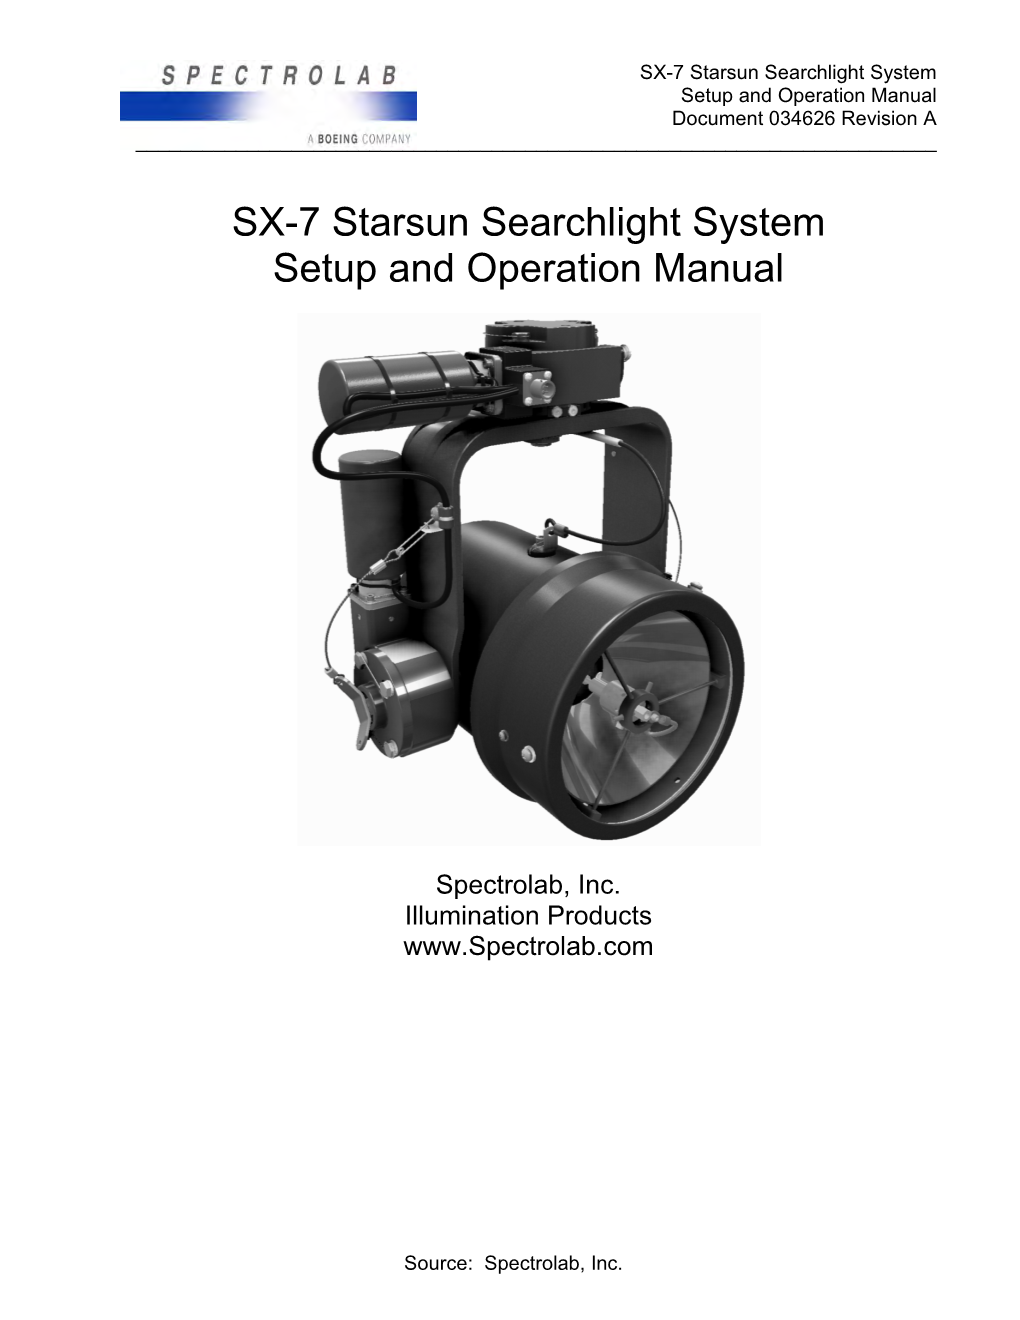 SX-7 Starsun Searchlight System Setup and Operation Manual Document 034626 Revision a ______